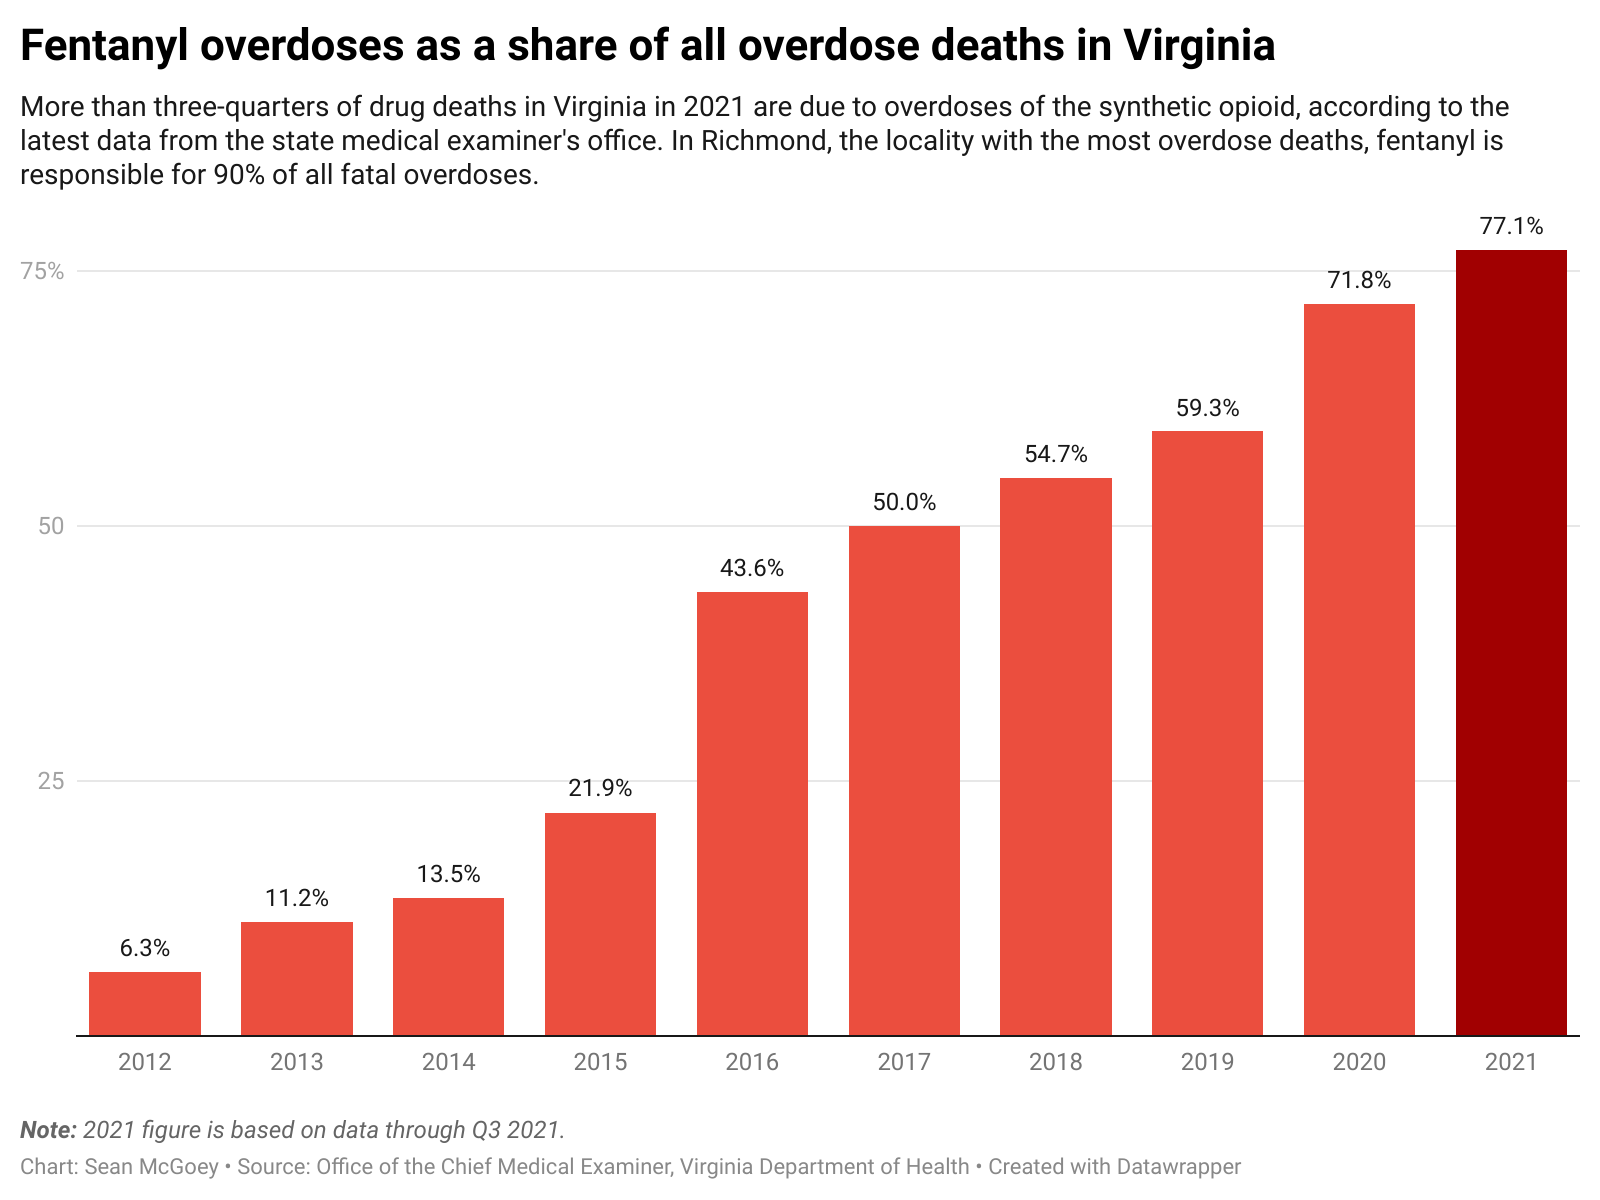 More than three-quarters of drug deaths in Virginia in 2021 are due to overdoses of fentanyl, according to the state medical examiner's office.